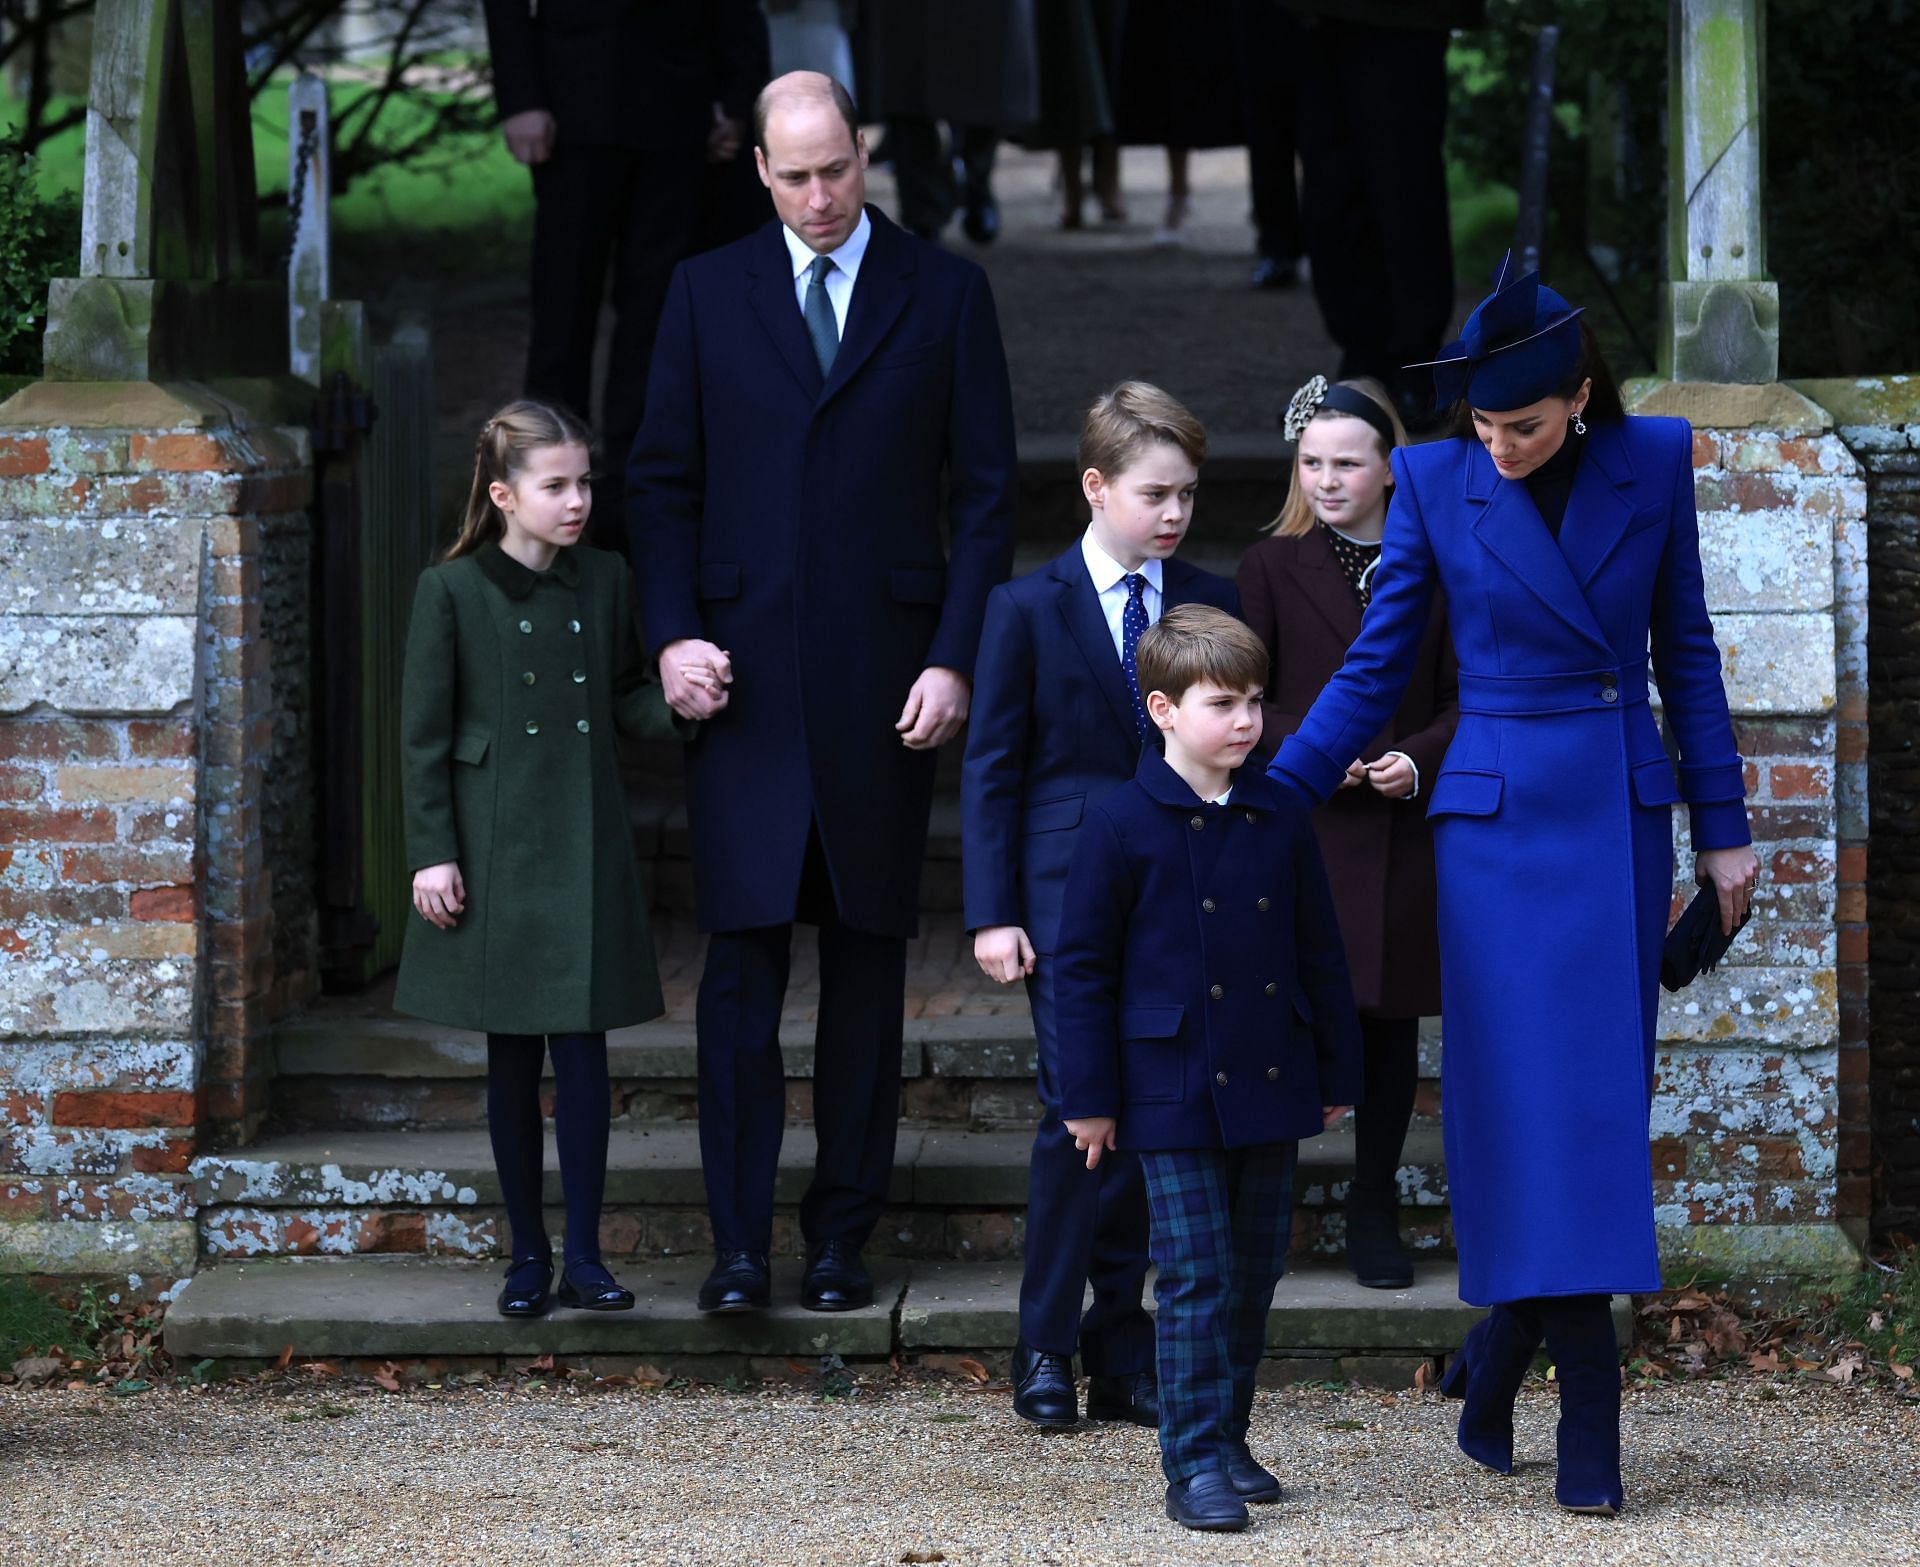 The Prince and Princess of Wales attend the Christmas service with their children (Image via Getty Images)